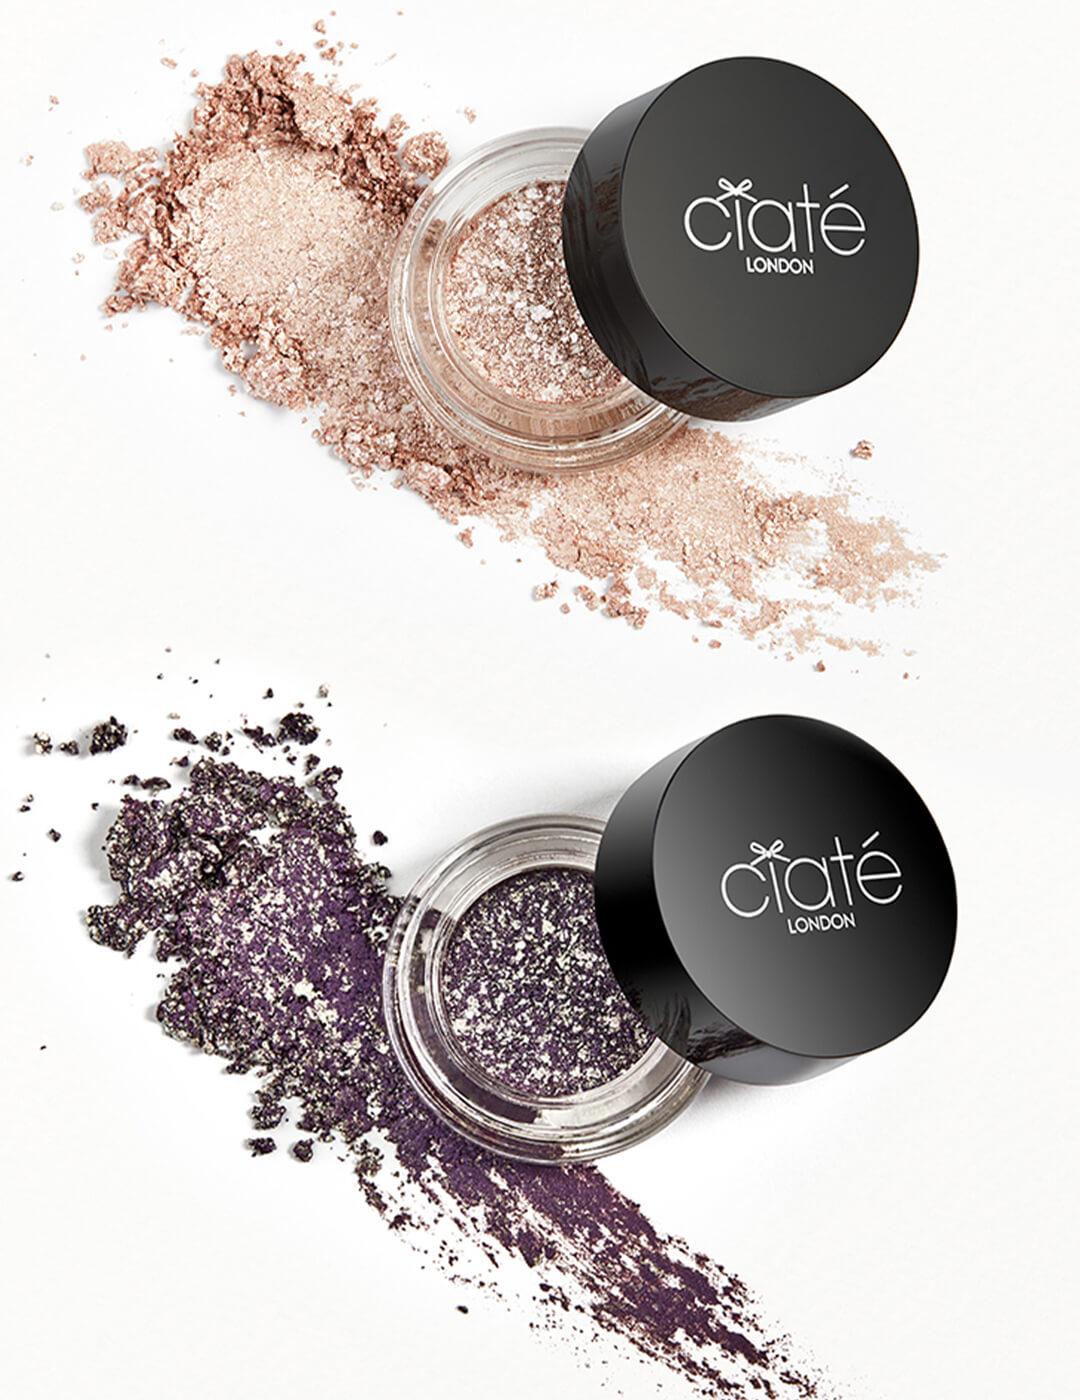 CIATÉ LONDON Marbled Metals Eyeshadows in Entwine and Wicked